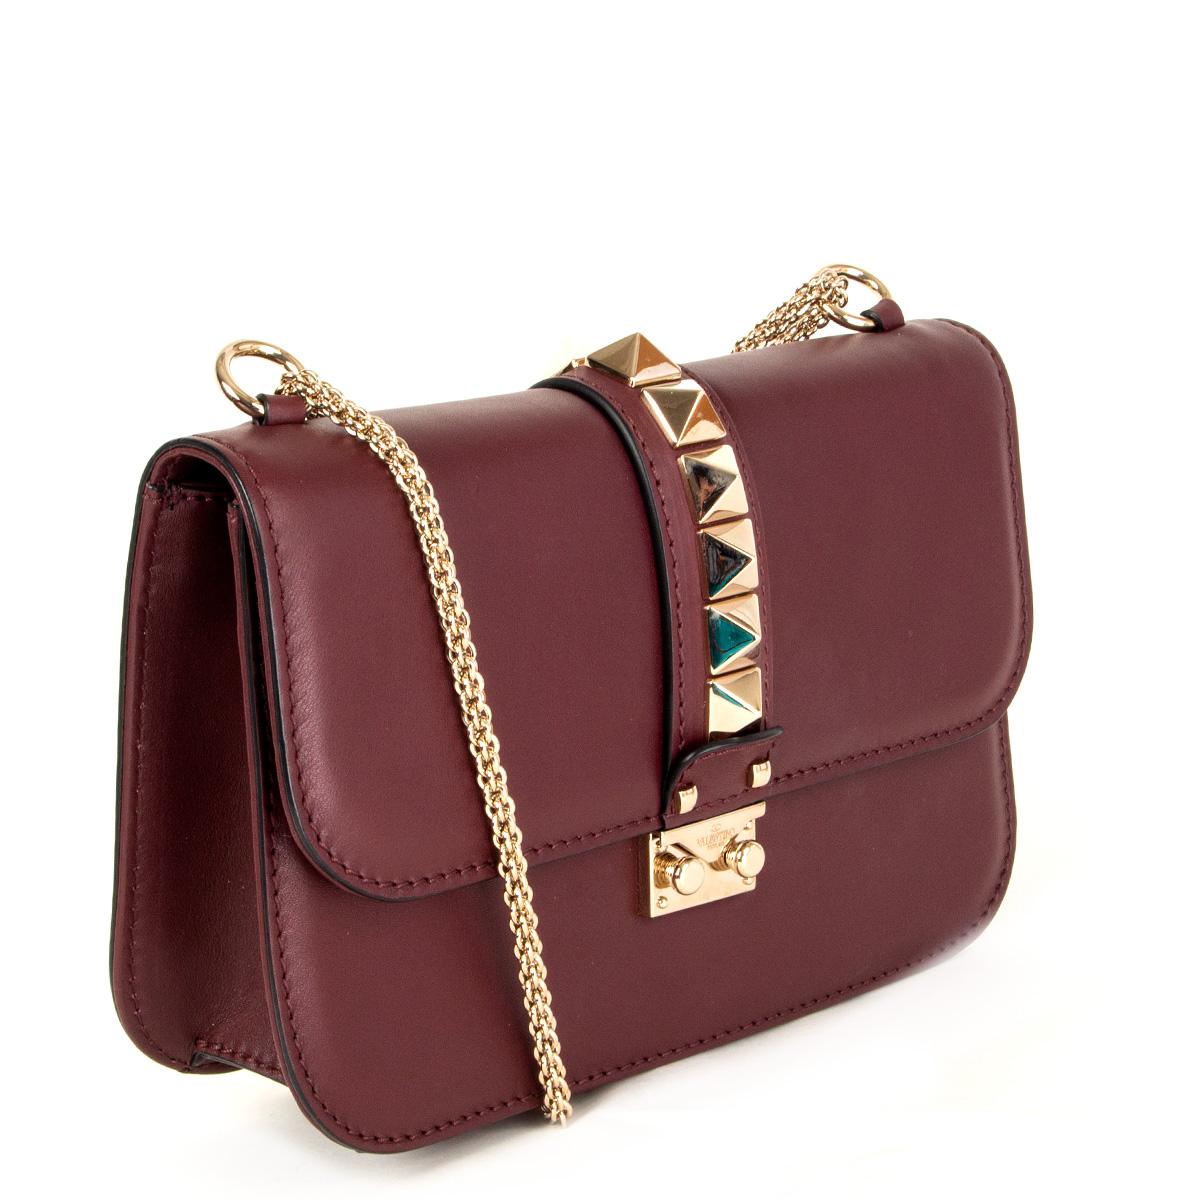 100% authentic Valentino Rockstud Glam Lock flap bag in burgundy calfskin features edgy, oversized pyramid studs in light gold-tone. A chain-link pull-through strap can be used as a shoulder strap, worn across the body, or removed to carry this bag